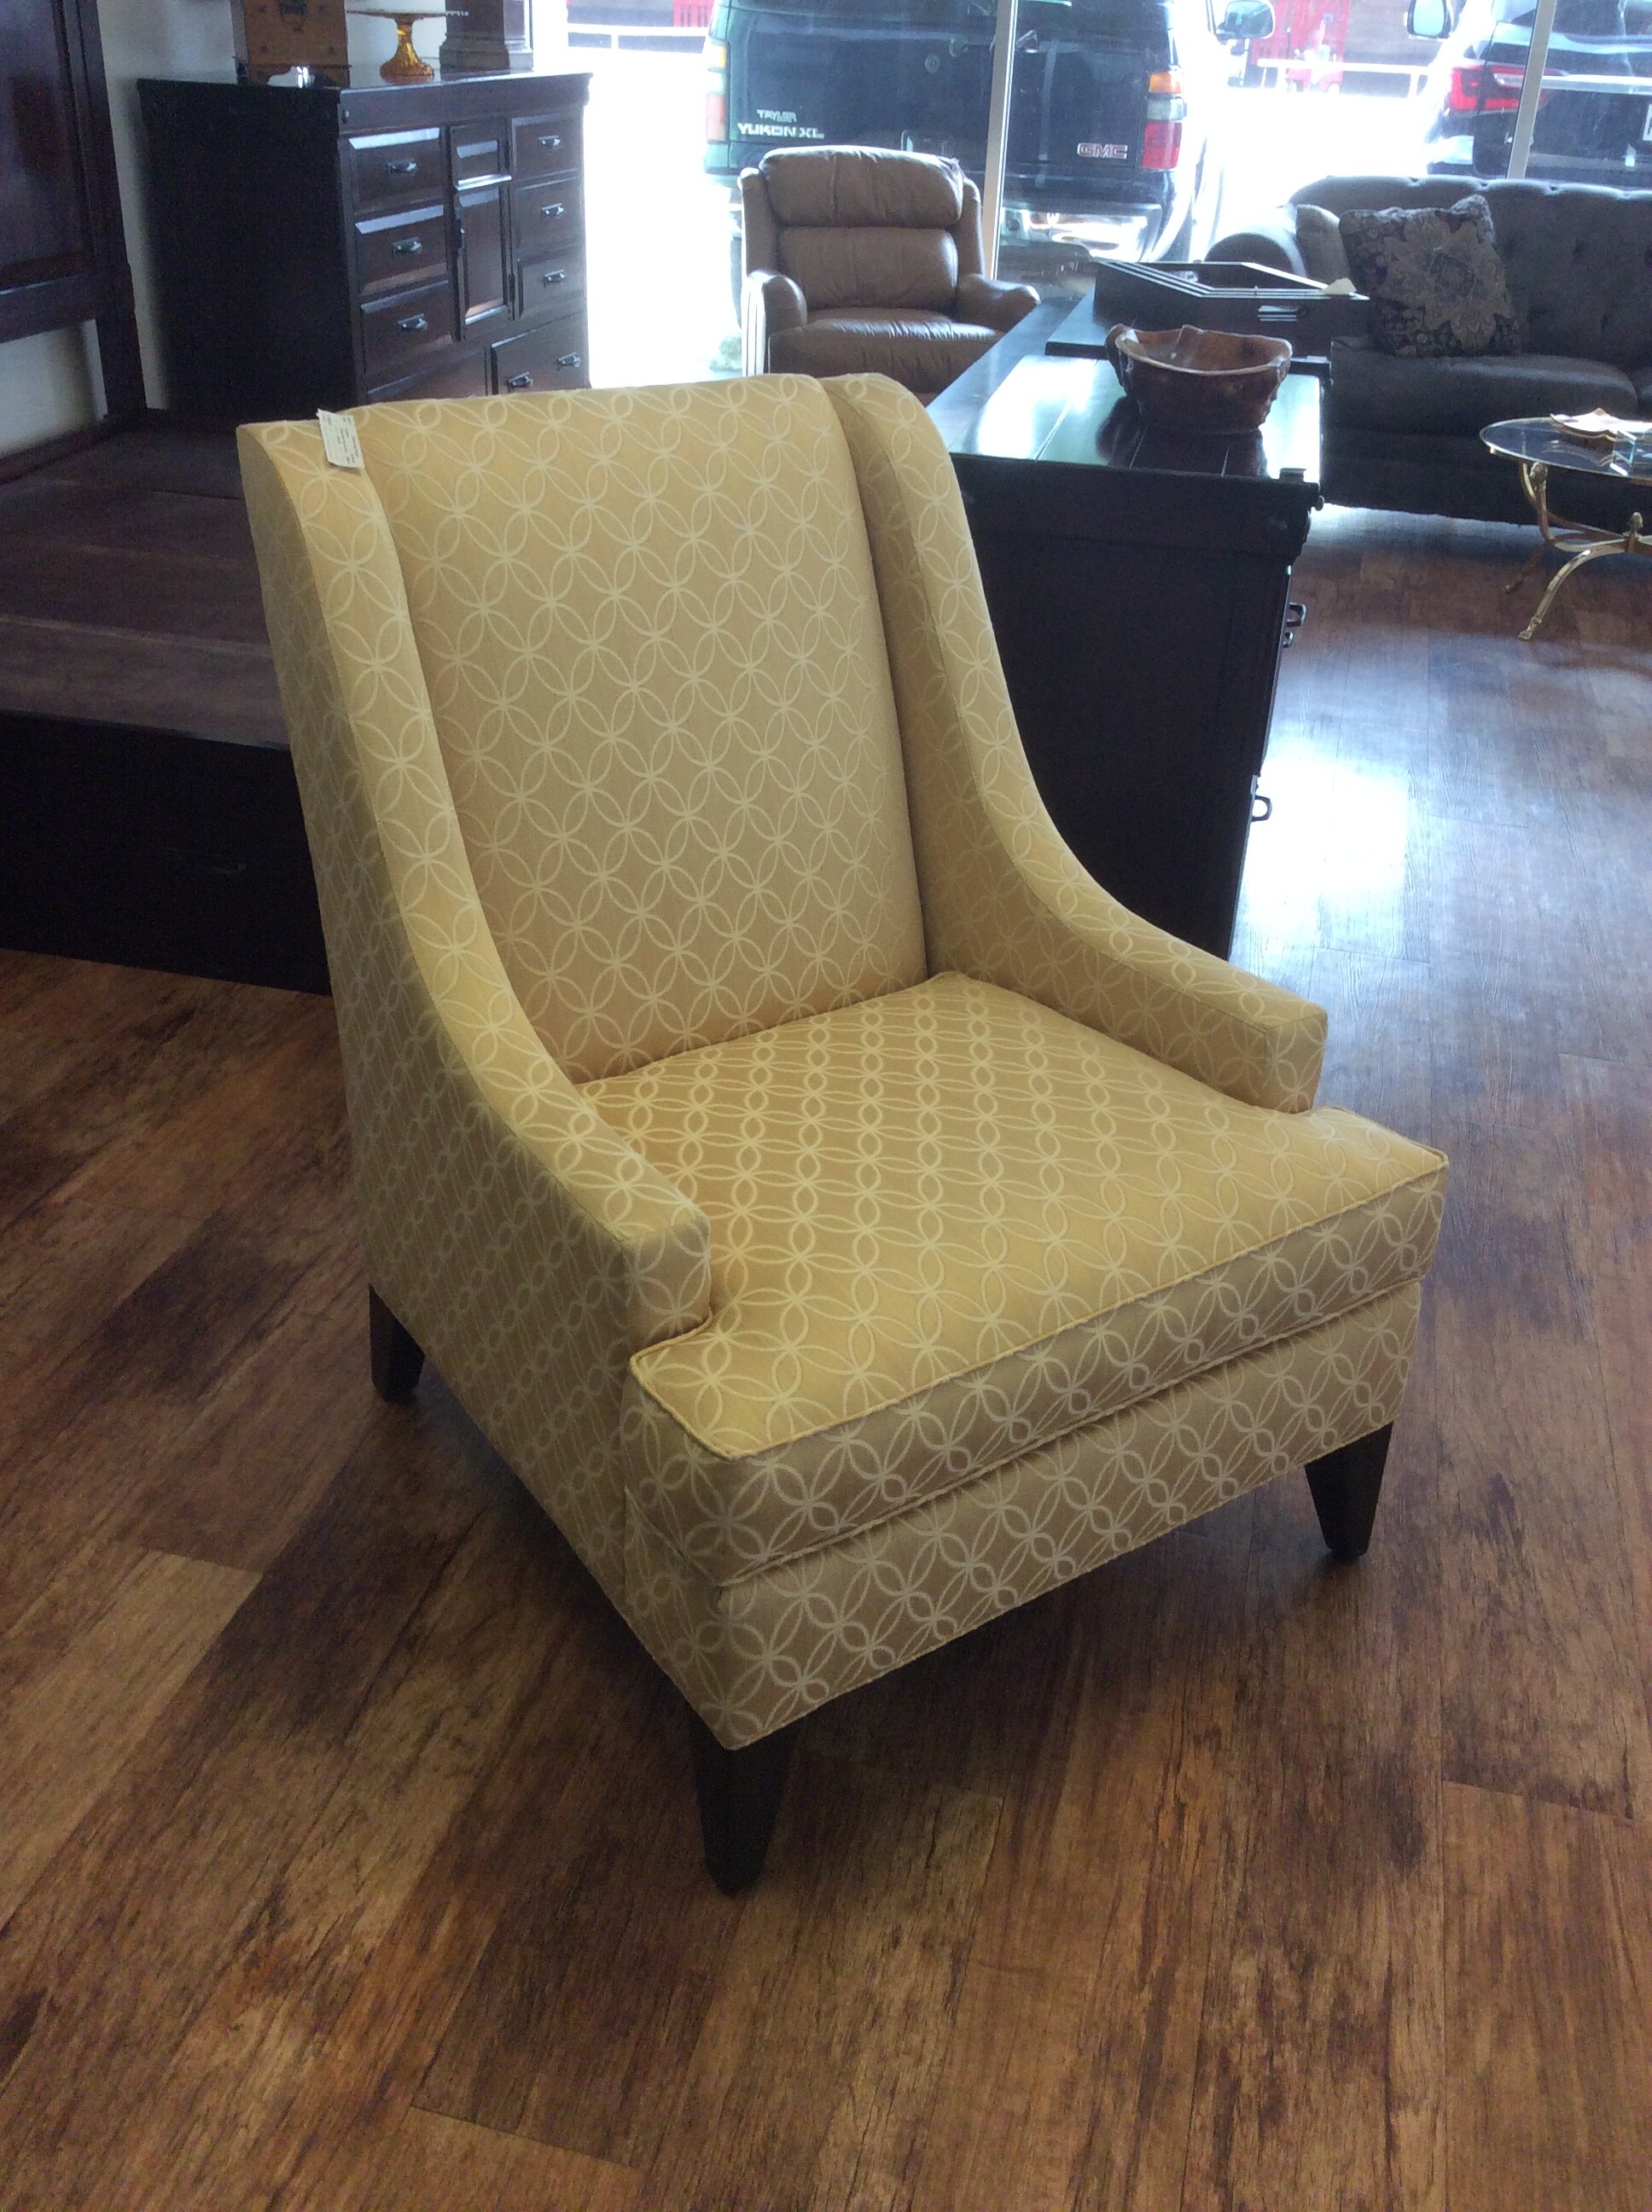 This is a buttercream and ivory Ethan Allen accent chair. This chair has a beautiful circle and diamond pattern and dark brown legs.